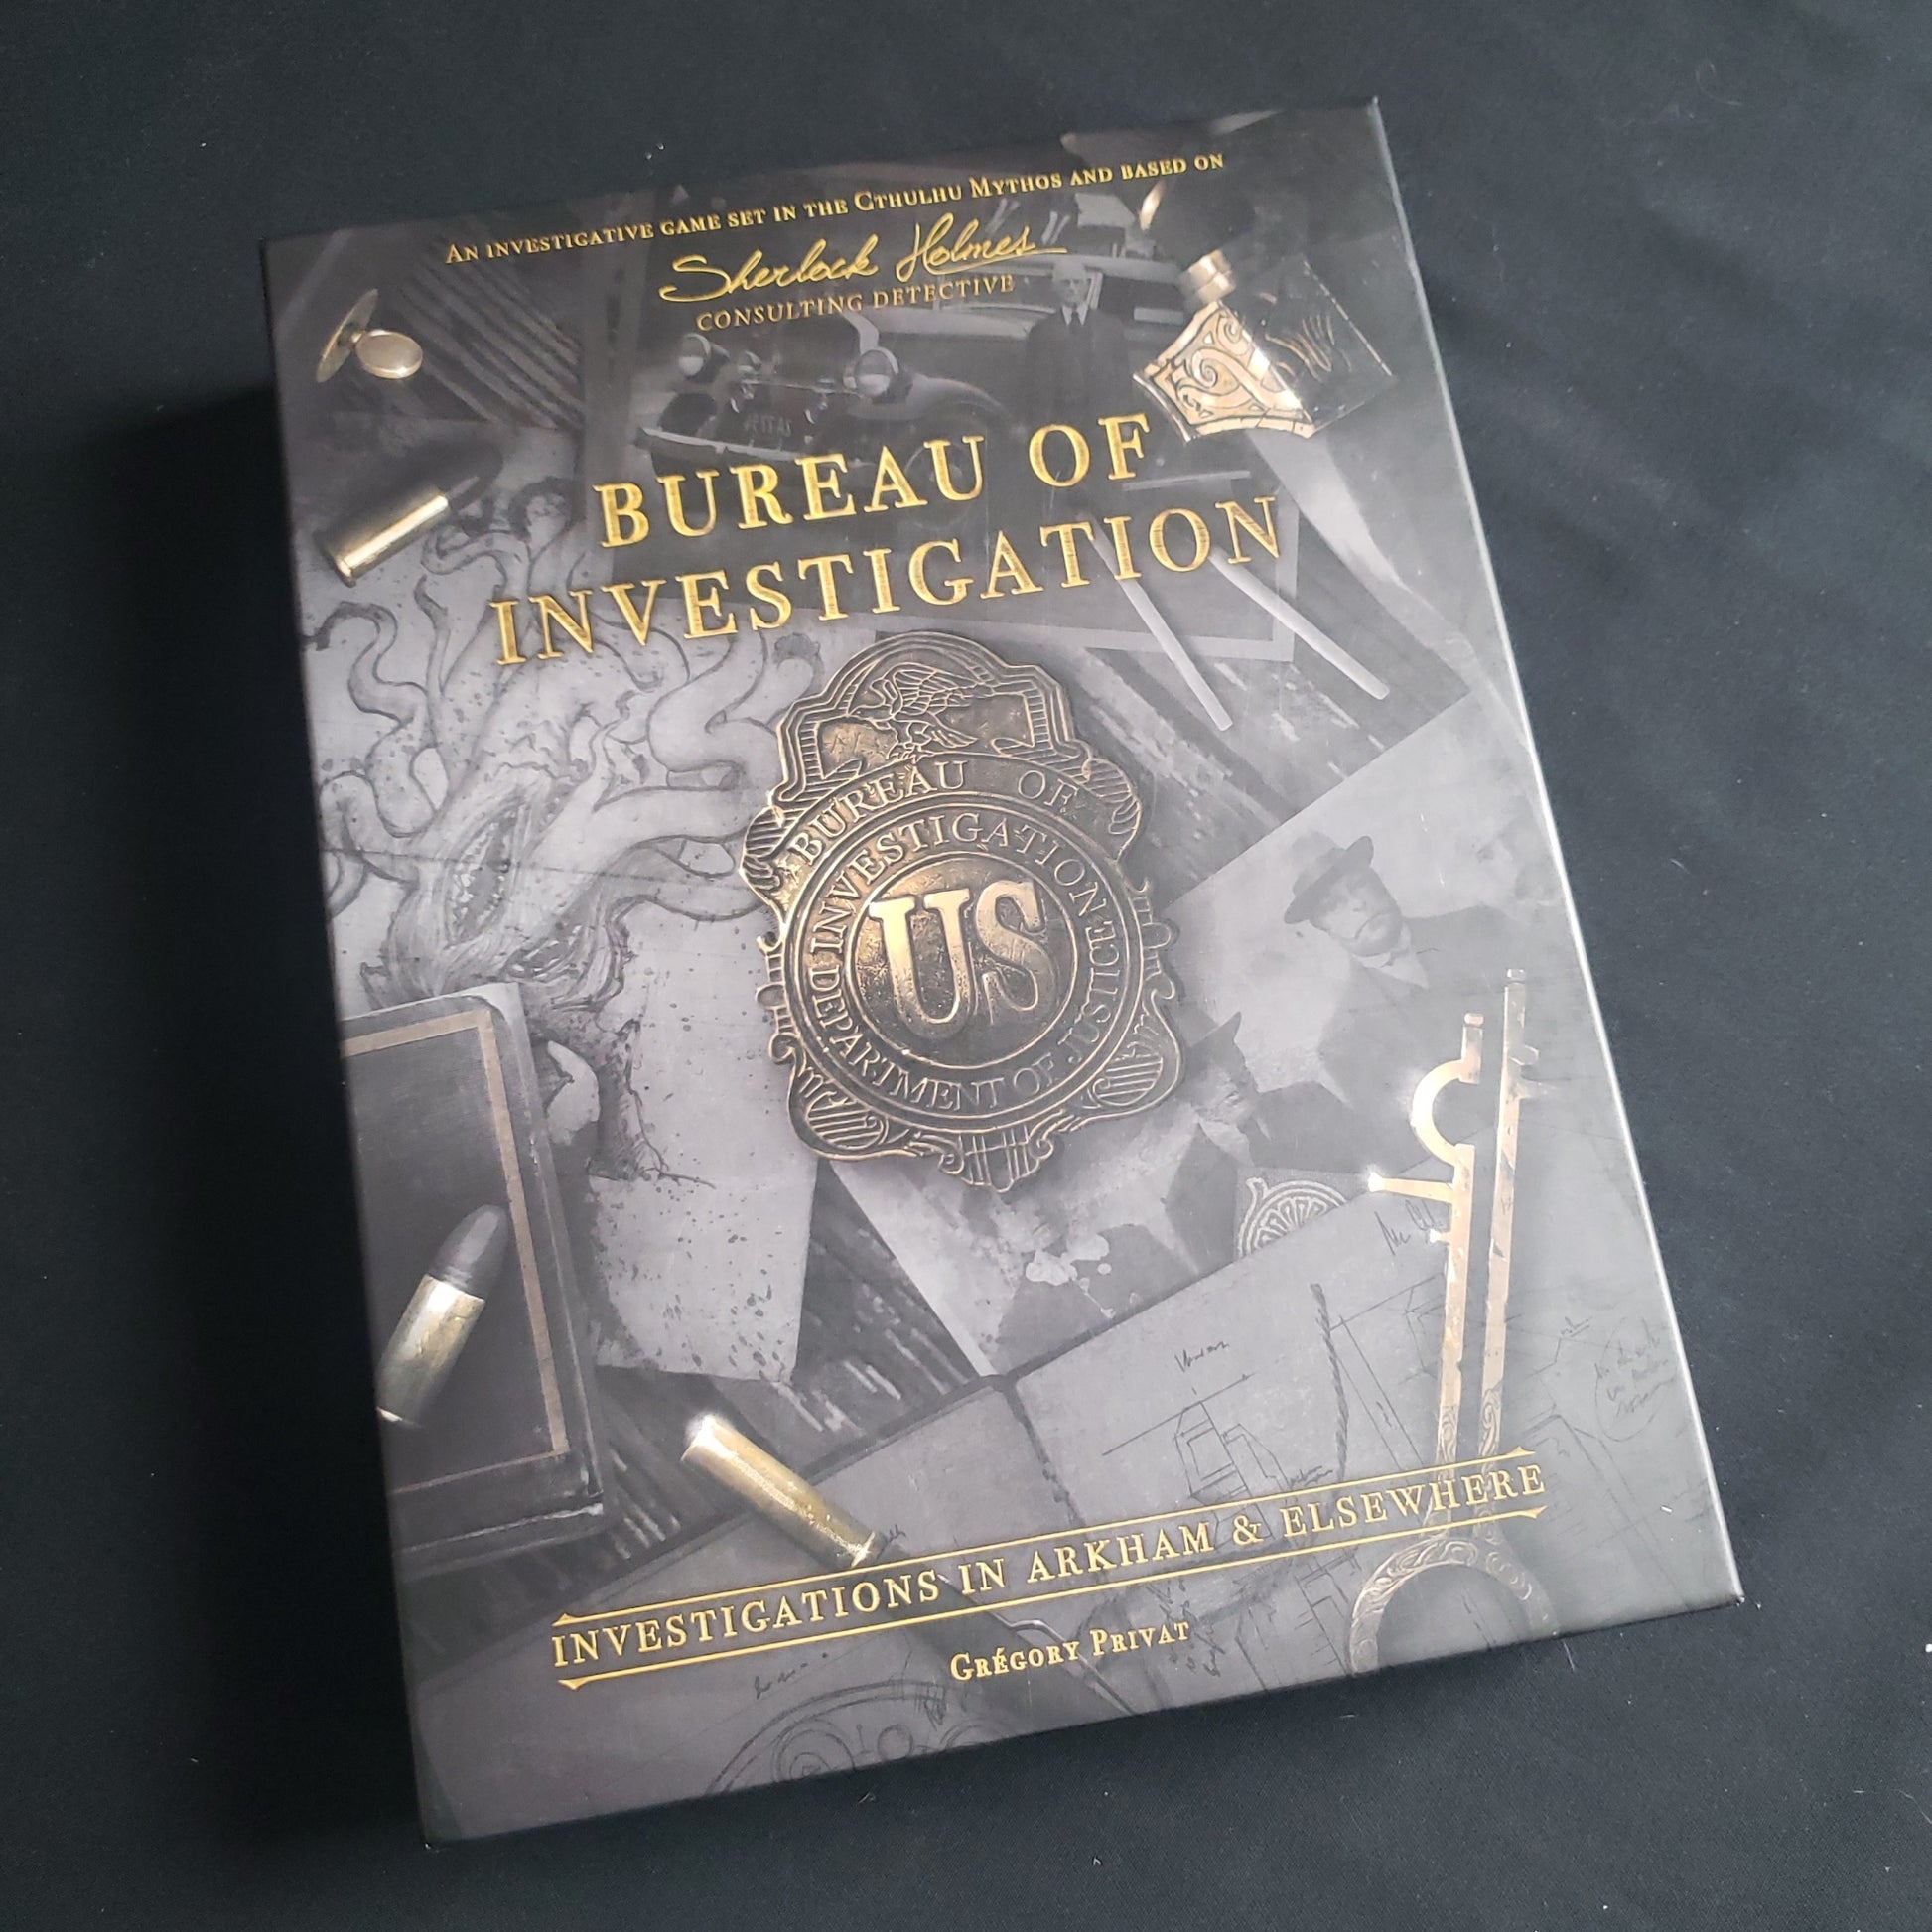 Image shows the front cover of the box of the Bureau of Investigation board game